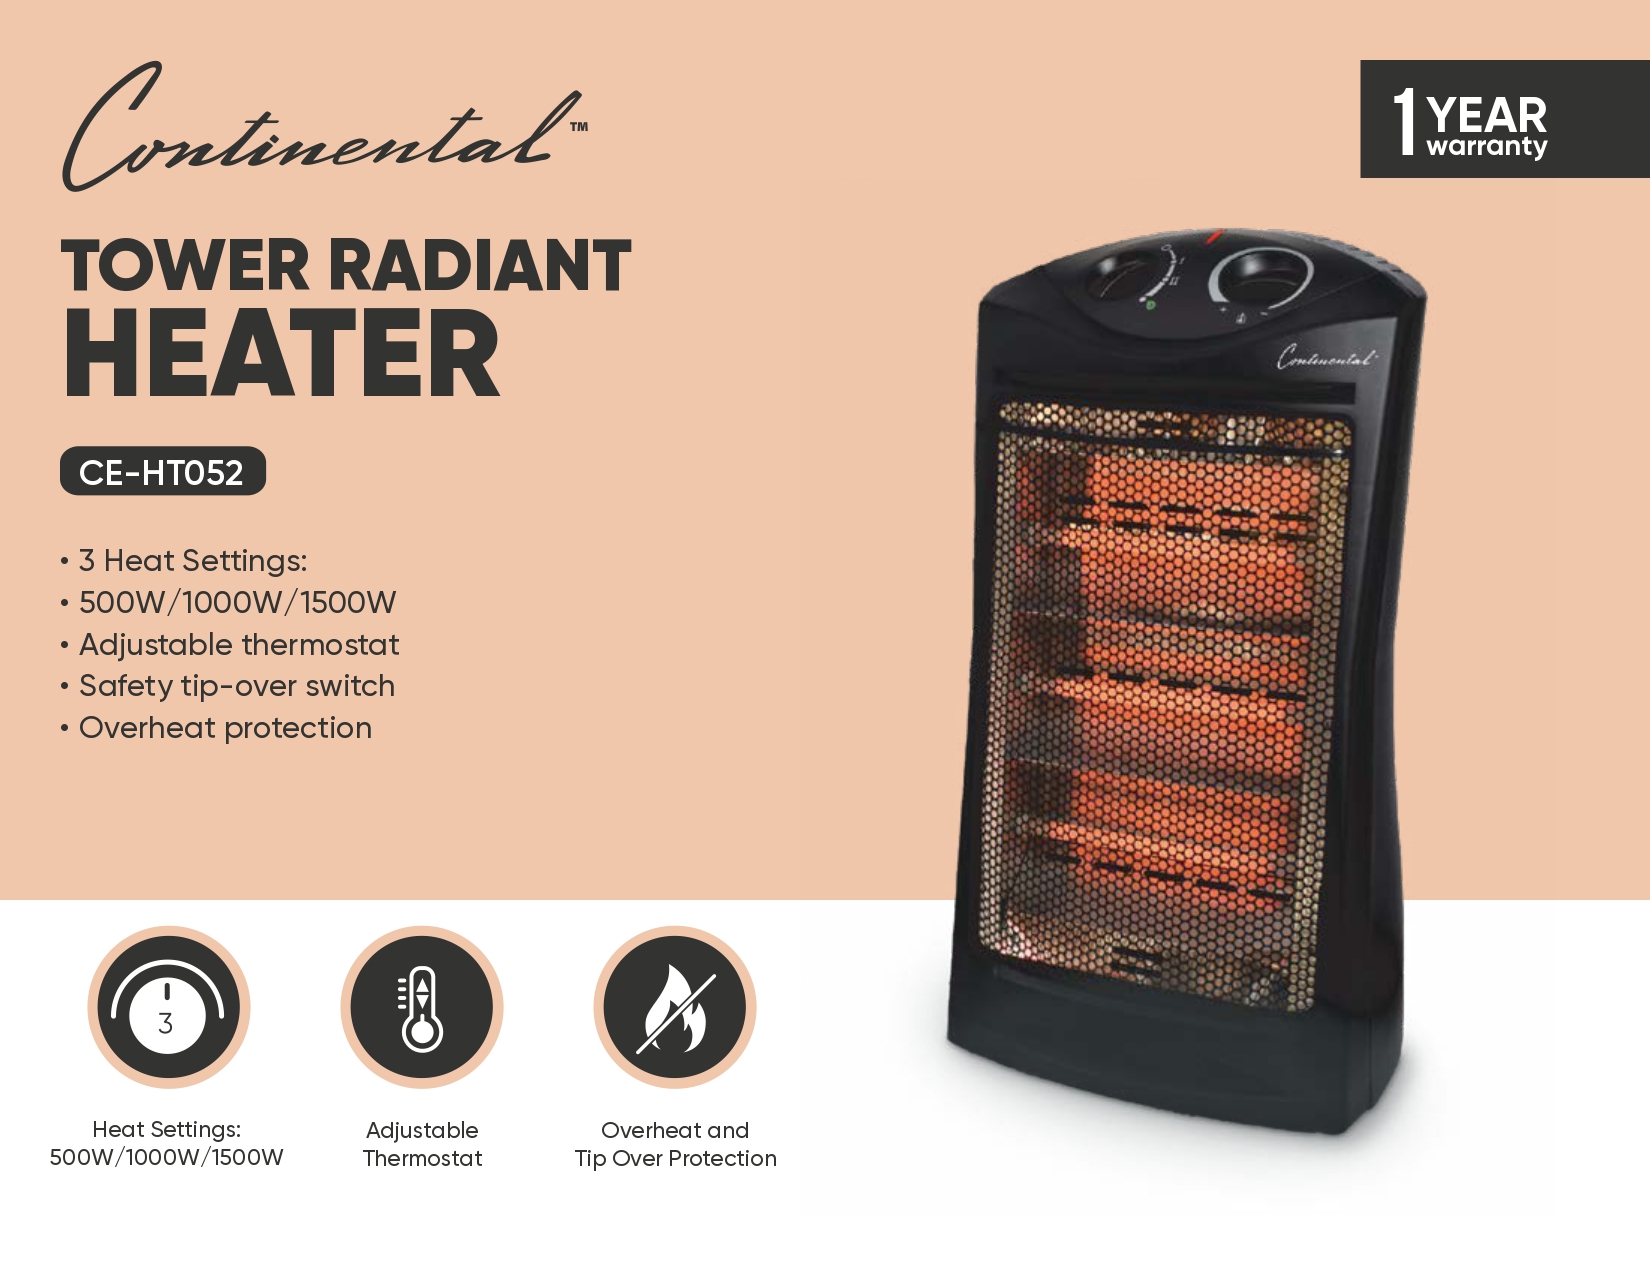 TOWER RADIANT HEATER